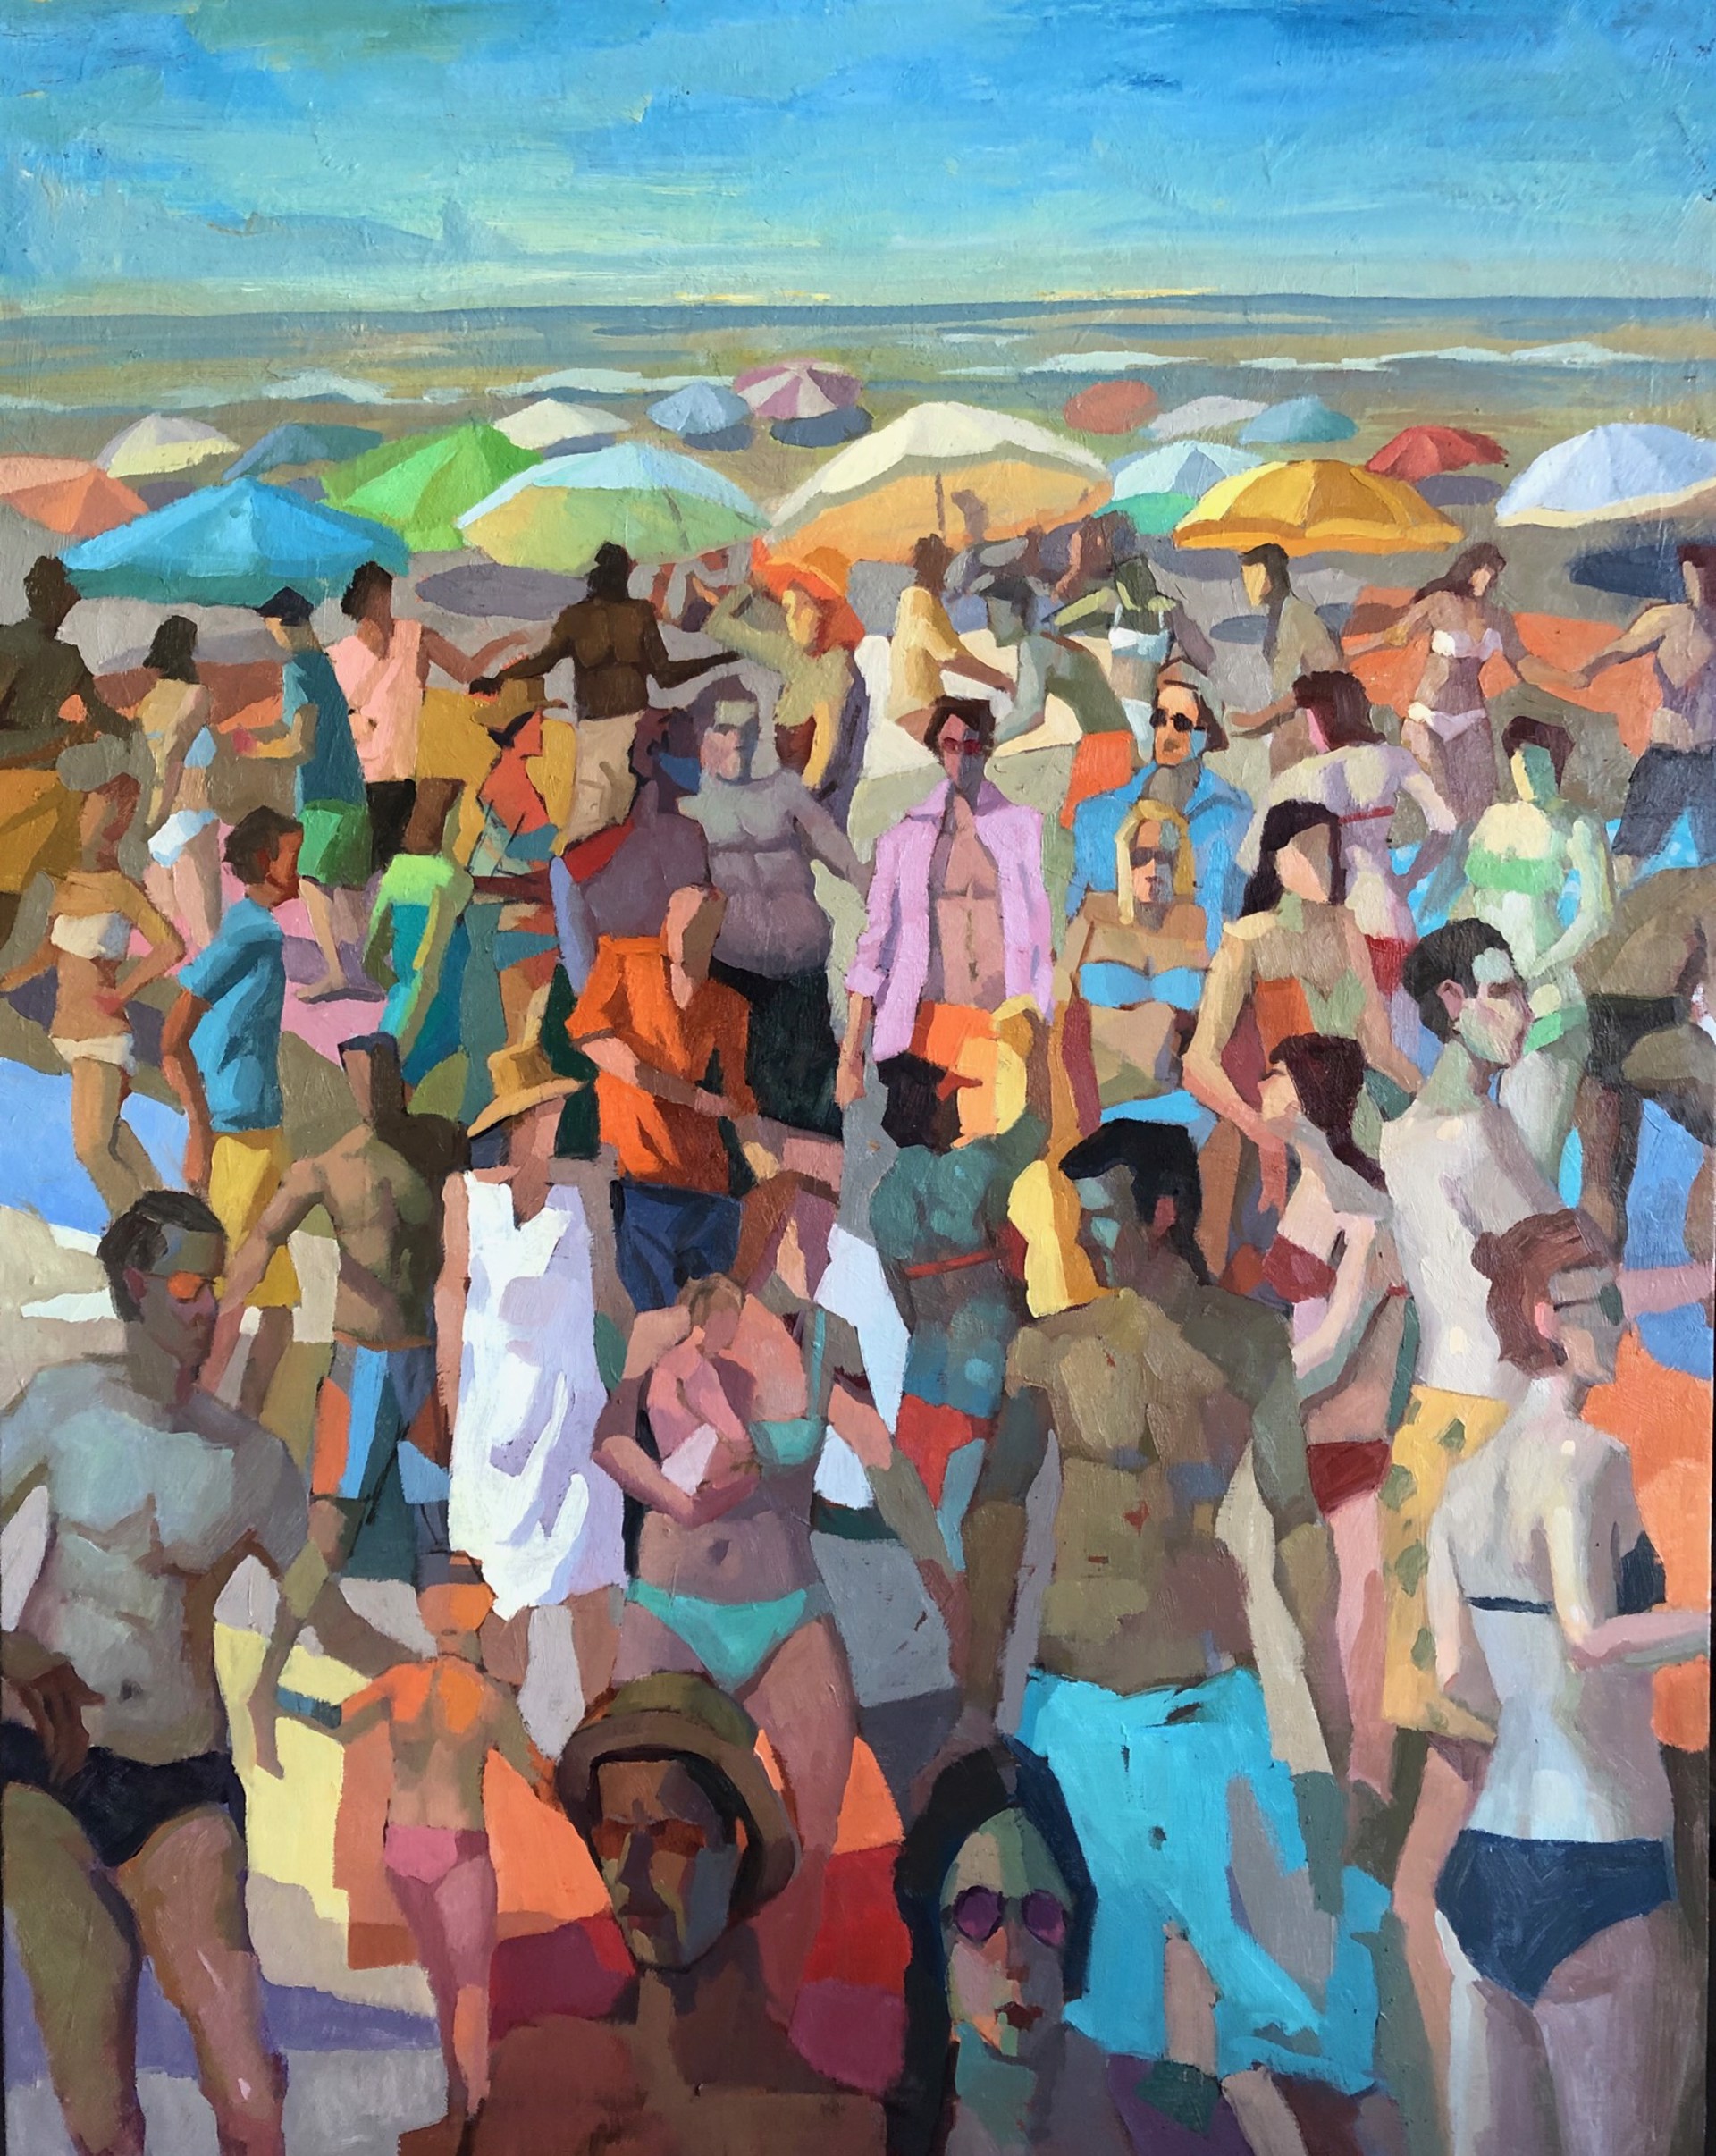 The Beach Crowd by Michael Steirnagle